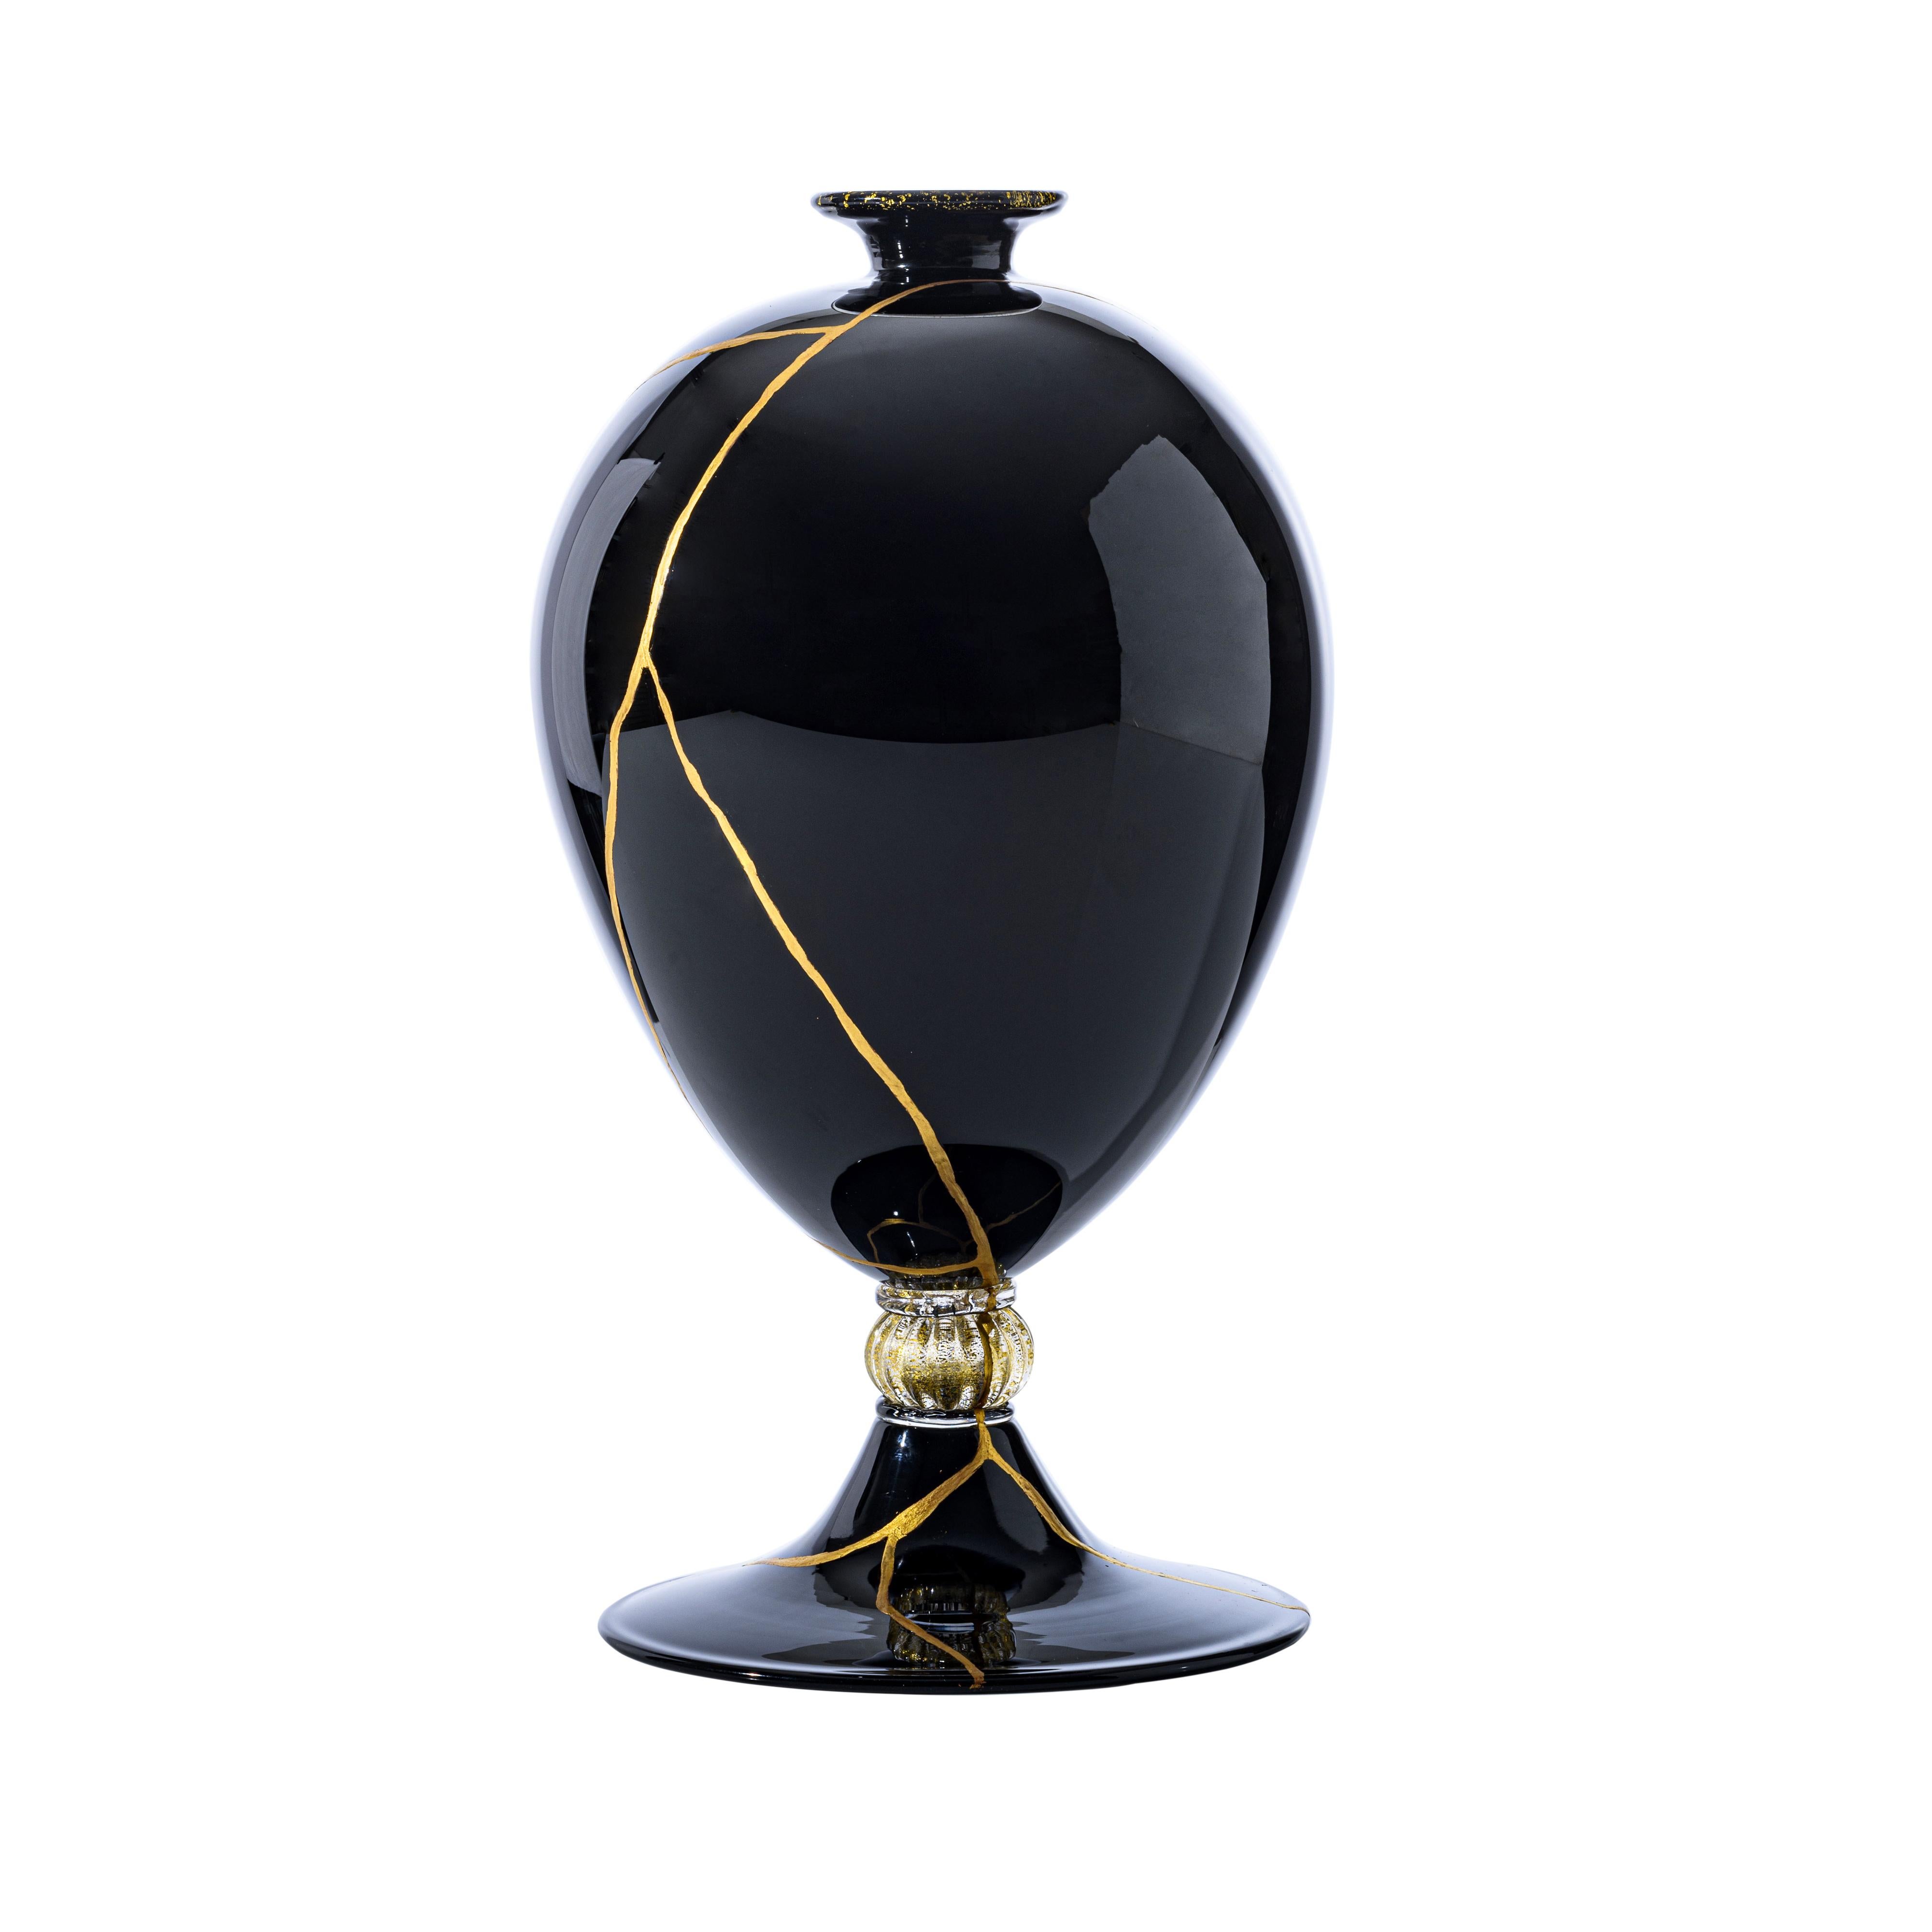 Veronese Vase by Vittorio Zecchini for Venini 1921 In New Condition For Sale In Byron Bay, NSW